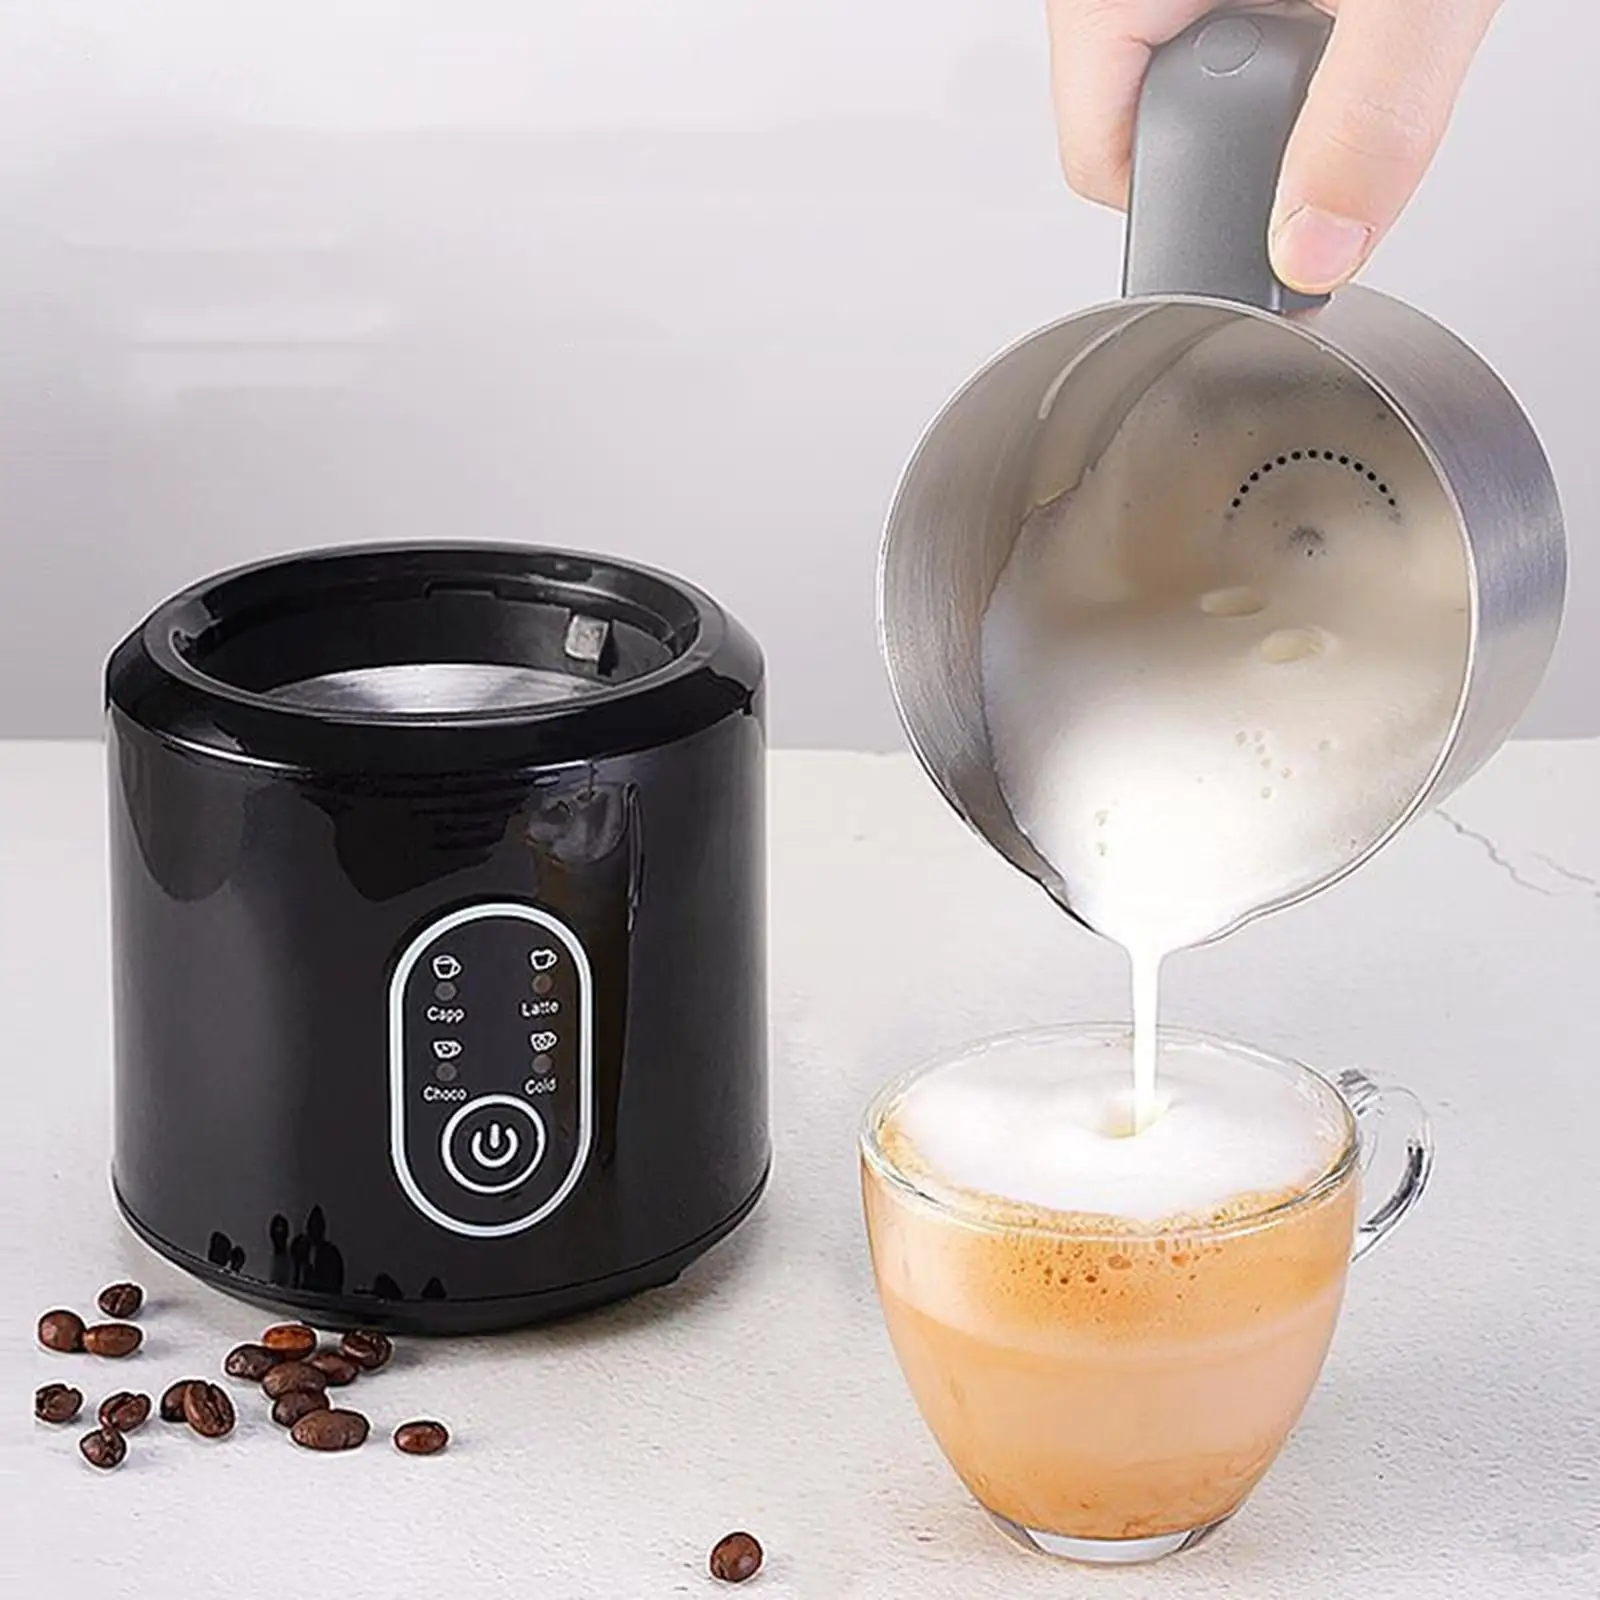 700ml Milk Frother, Detachable Dishwasher Safe Stainless Steel Black Electric Foam Machine for Cappuccinos Hot Chocolate Kitchen